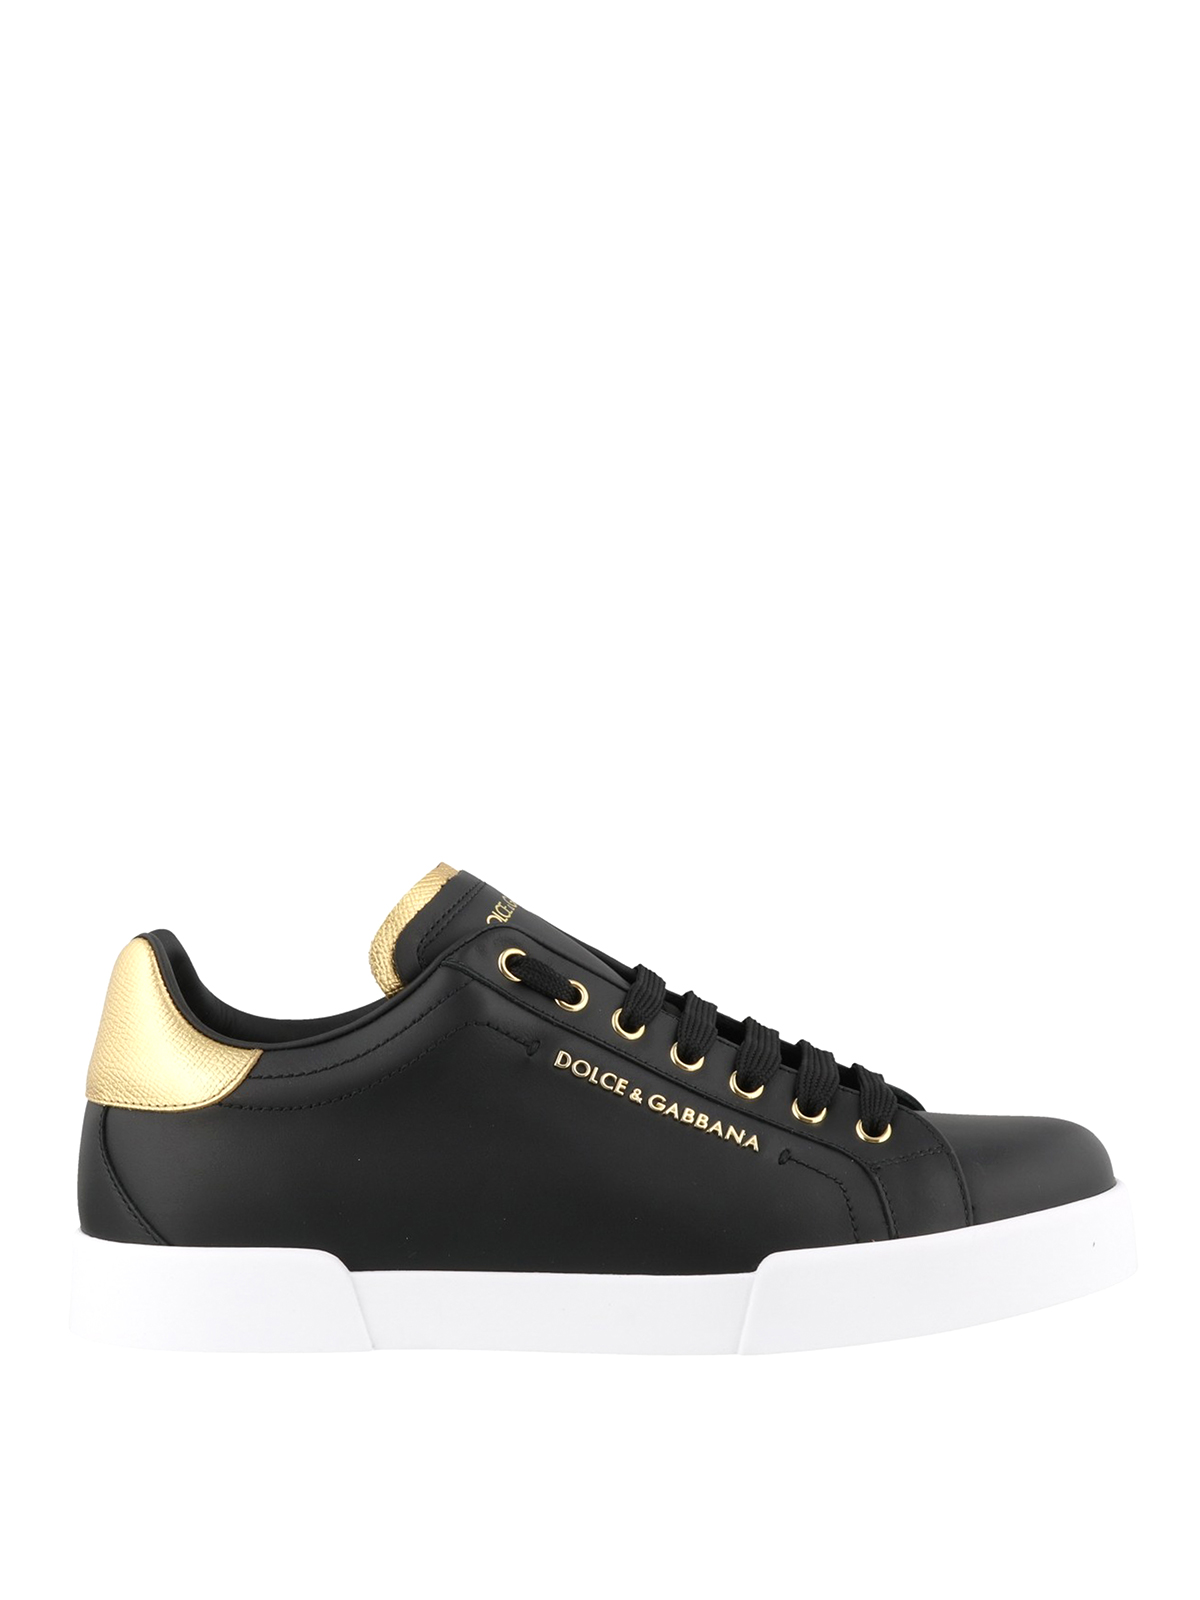 black and gold sneakers